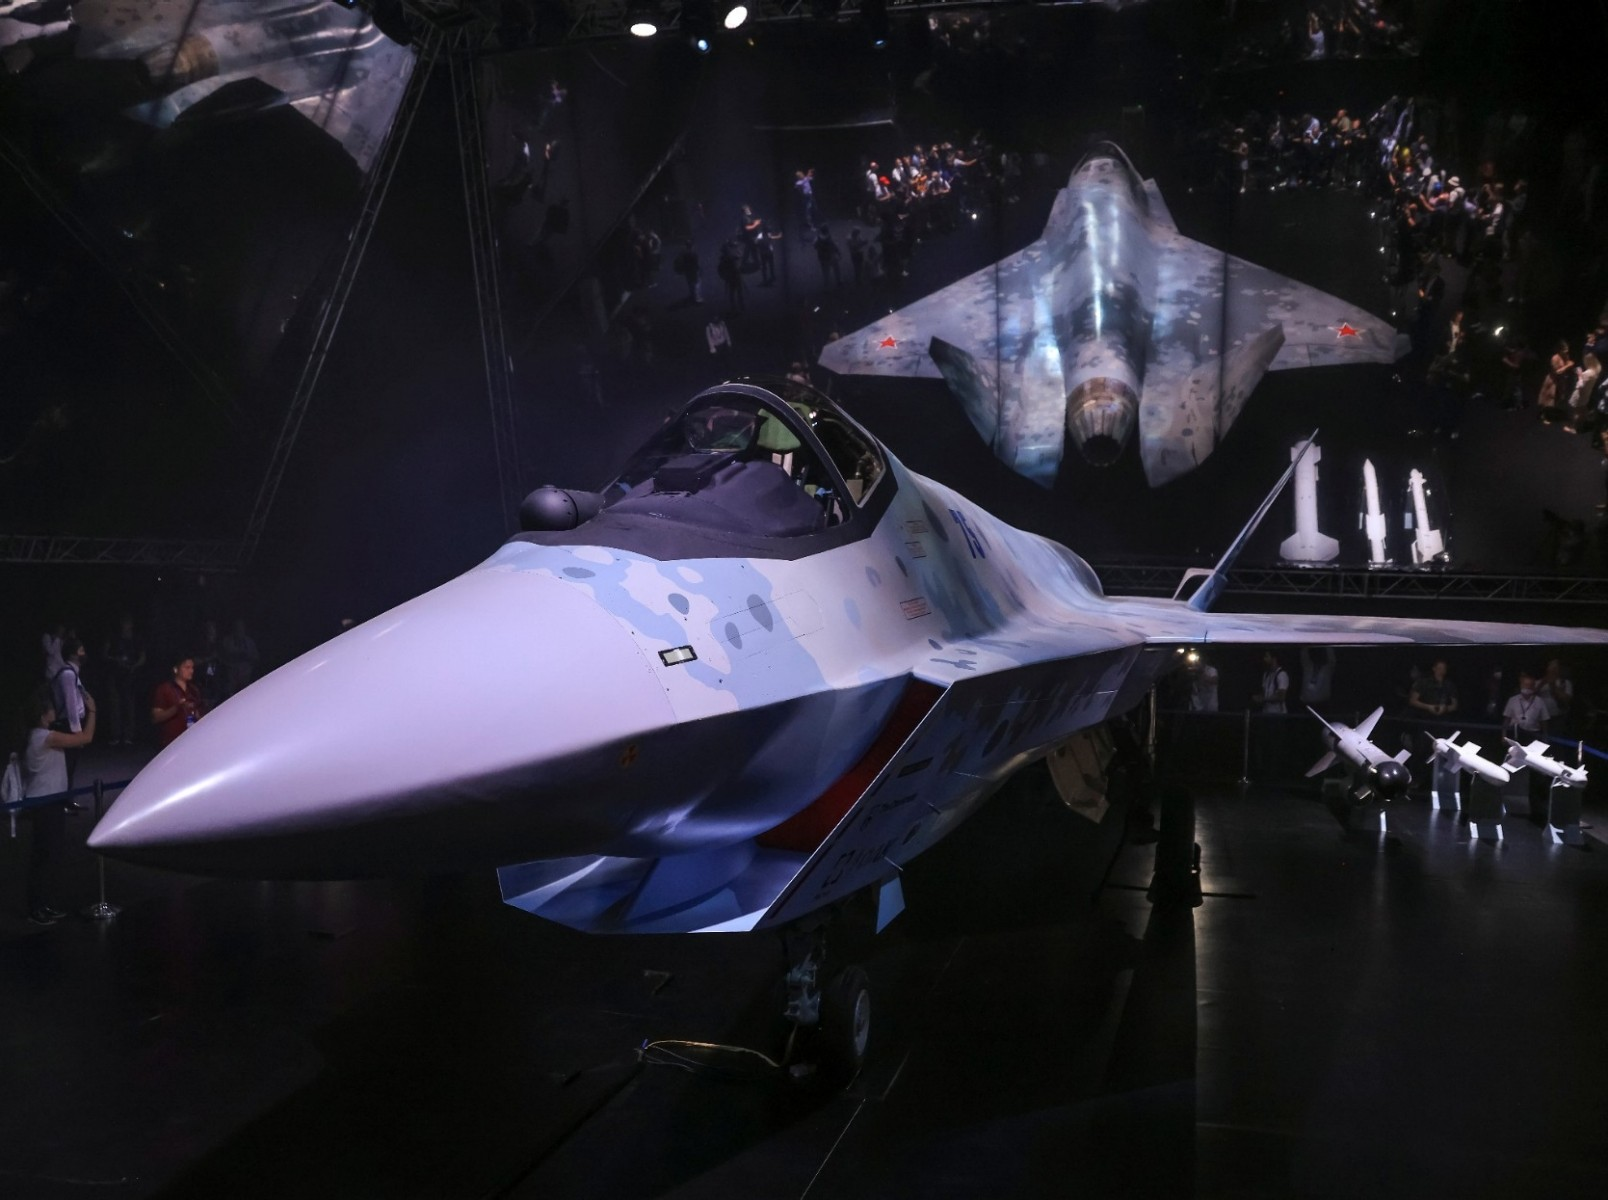 India has unveiled a mock-up of an unmanned wingman for its fighter jets -  ВПК.name